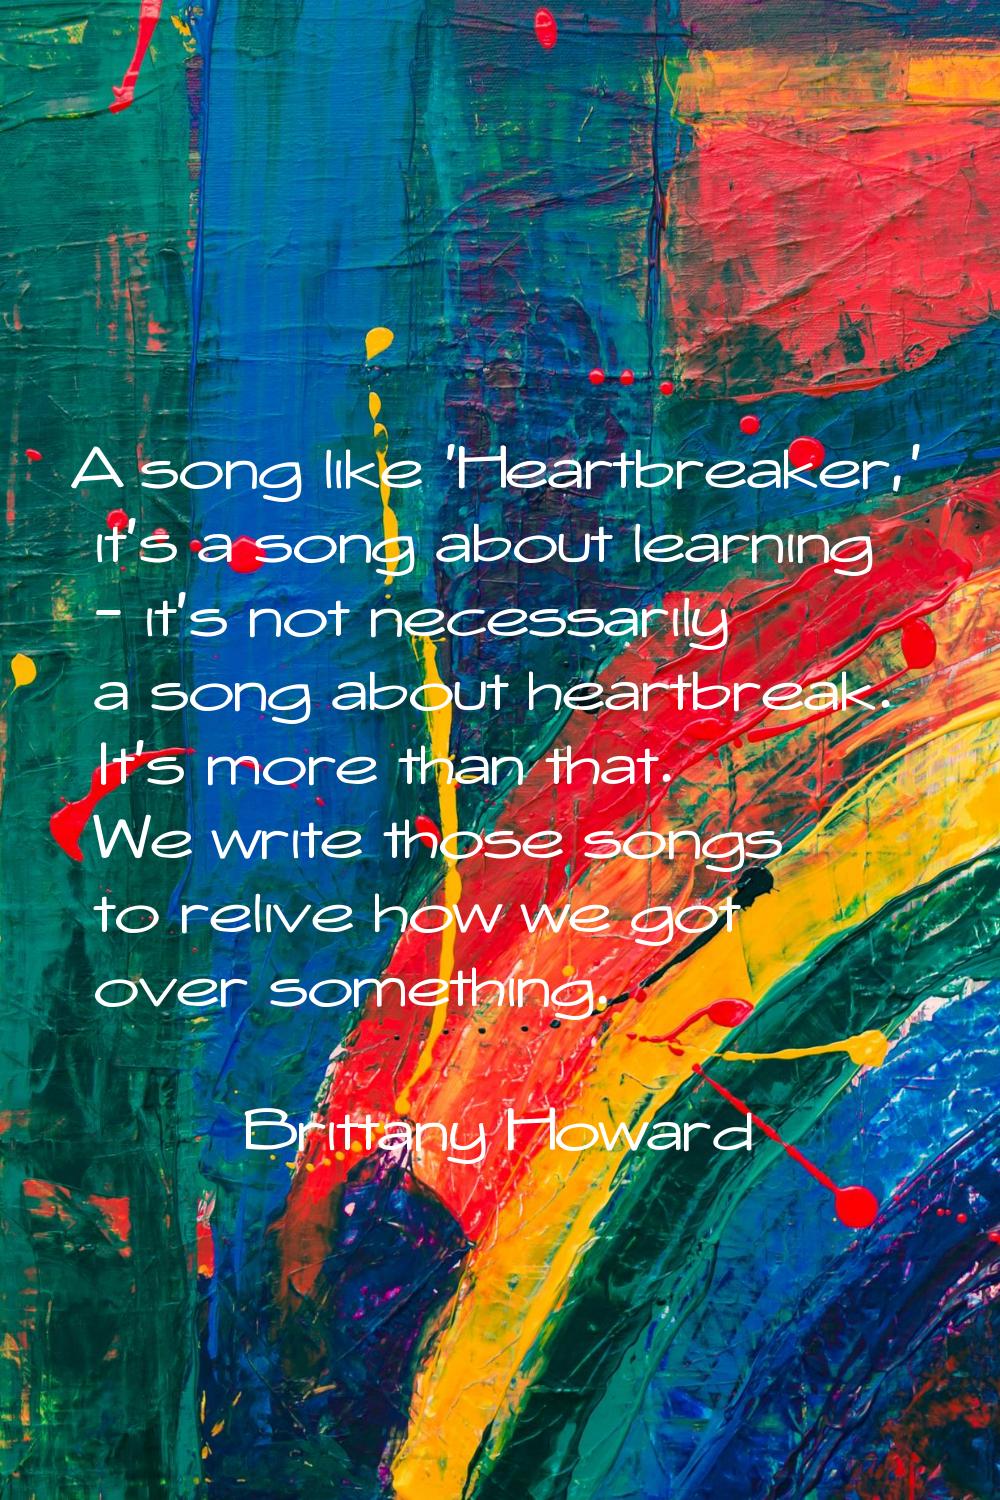 A song like 'Heartbreaker,' it's a song about learning - it's not necessarily a song about heartbre